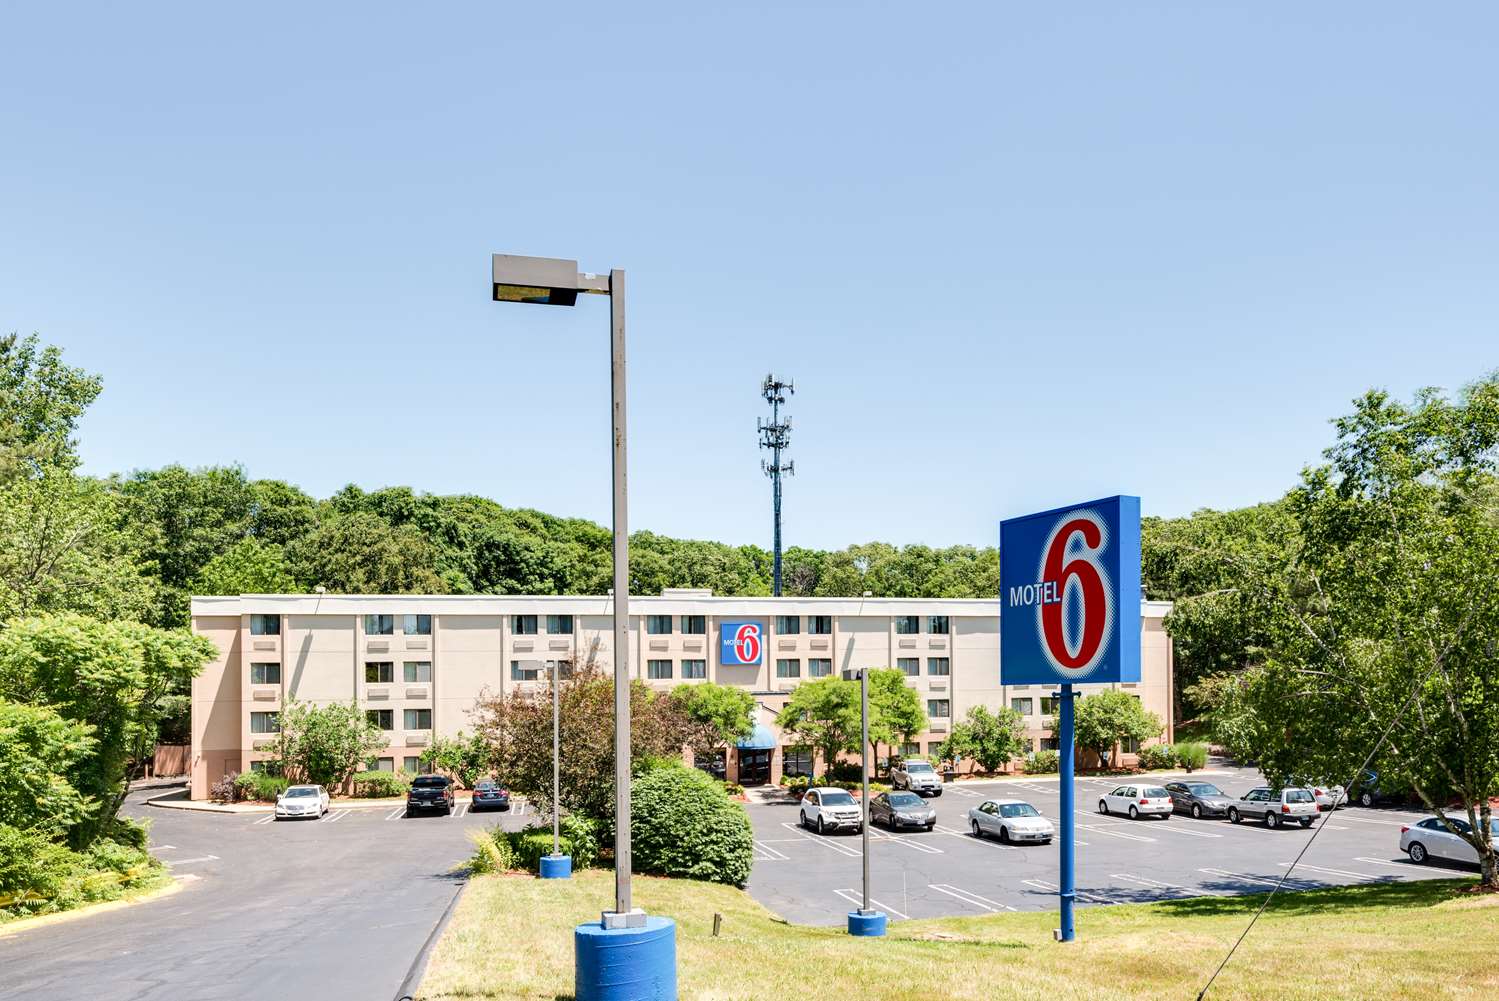 Pet Friendly Motel 6 Milford Ct in Milford, Connecticut